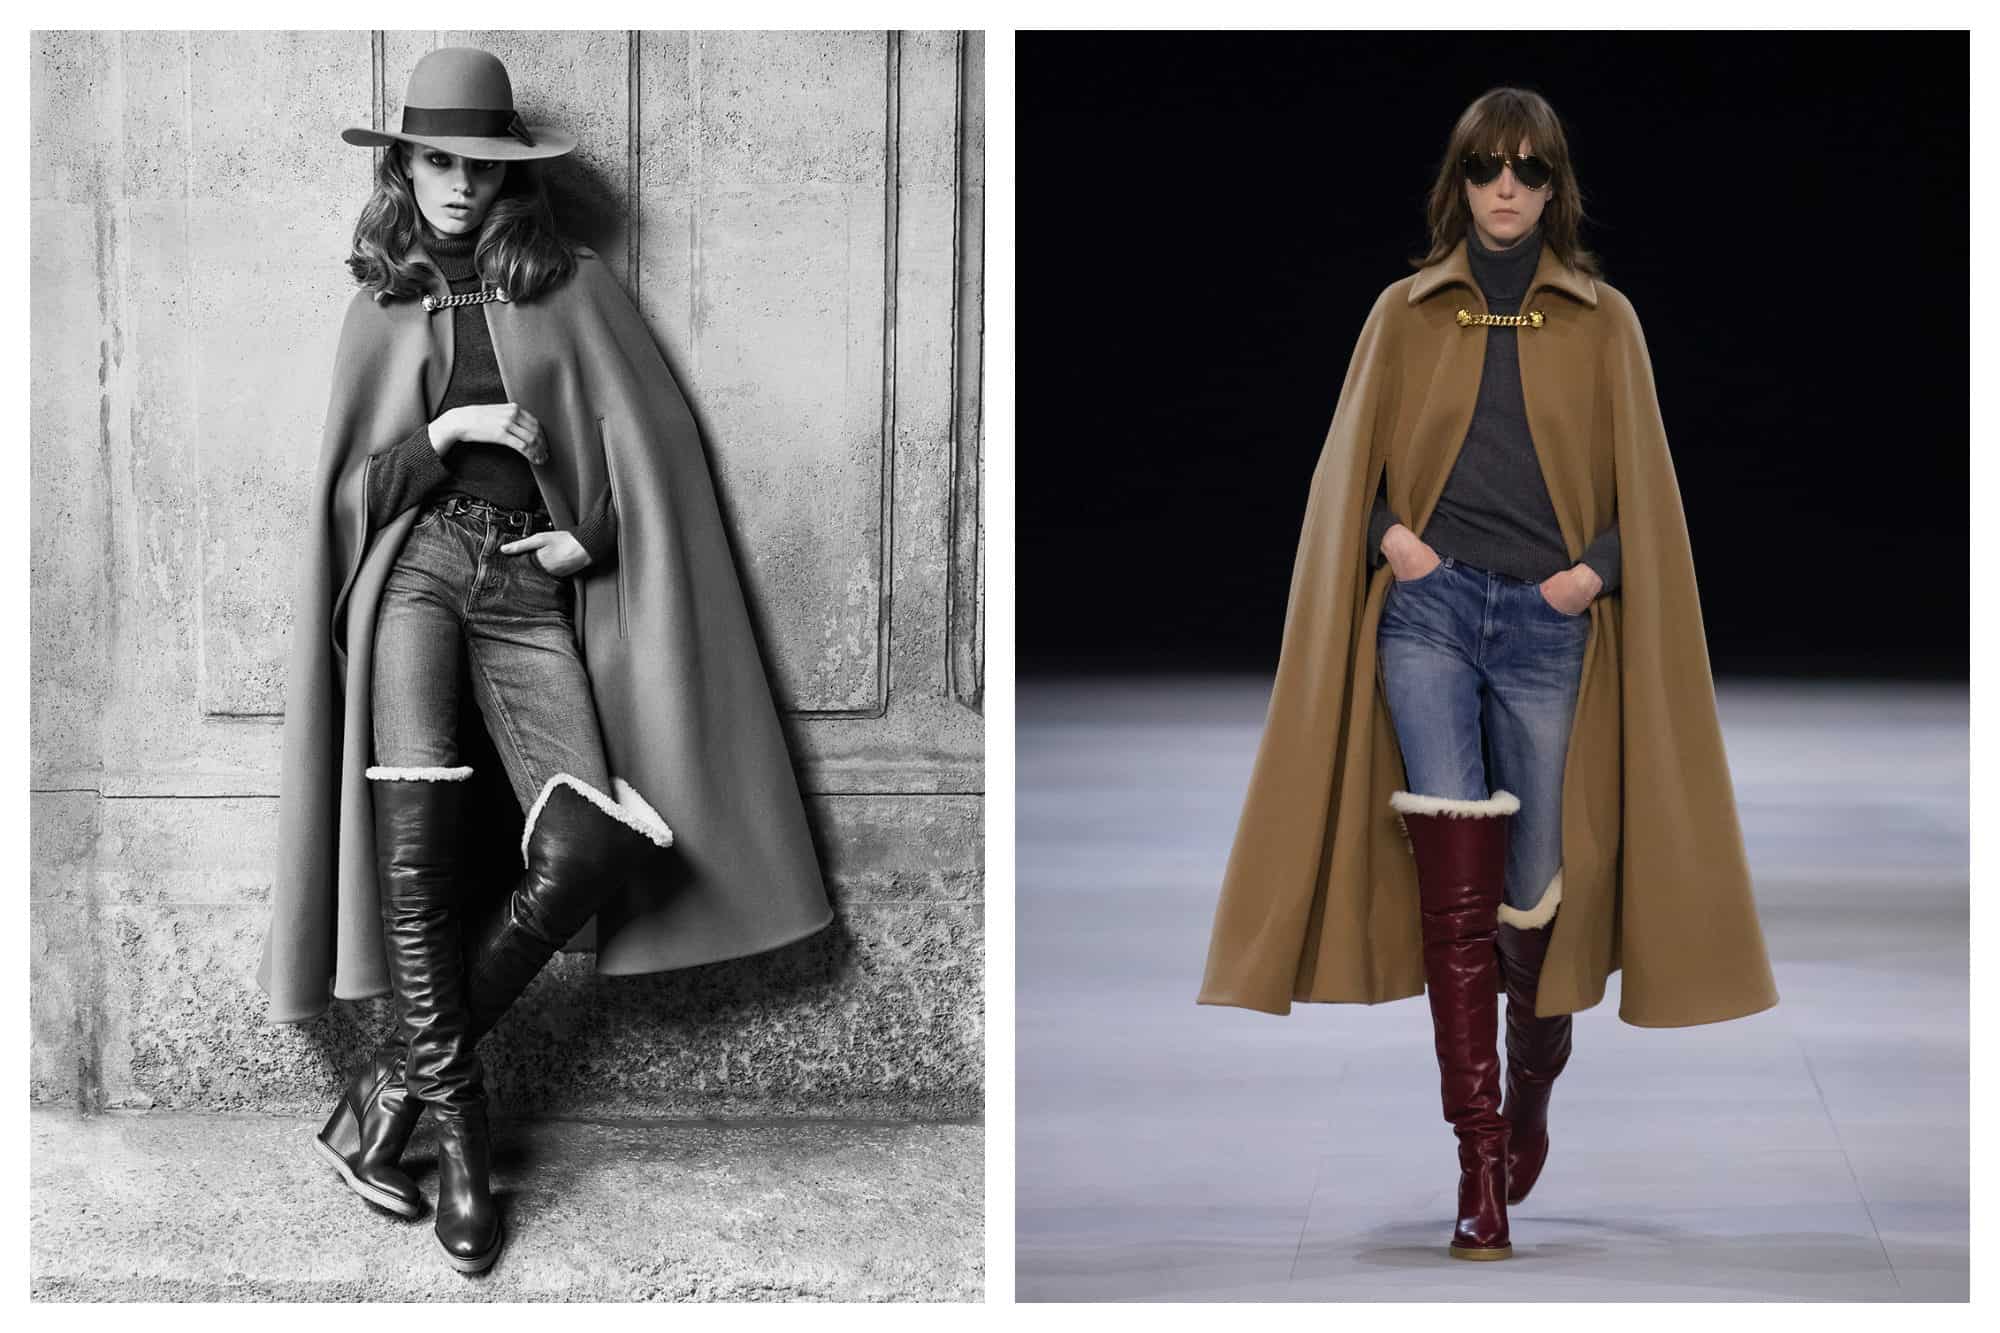 Capes are in this winter according to the fashion week trends.